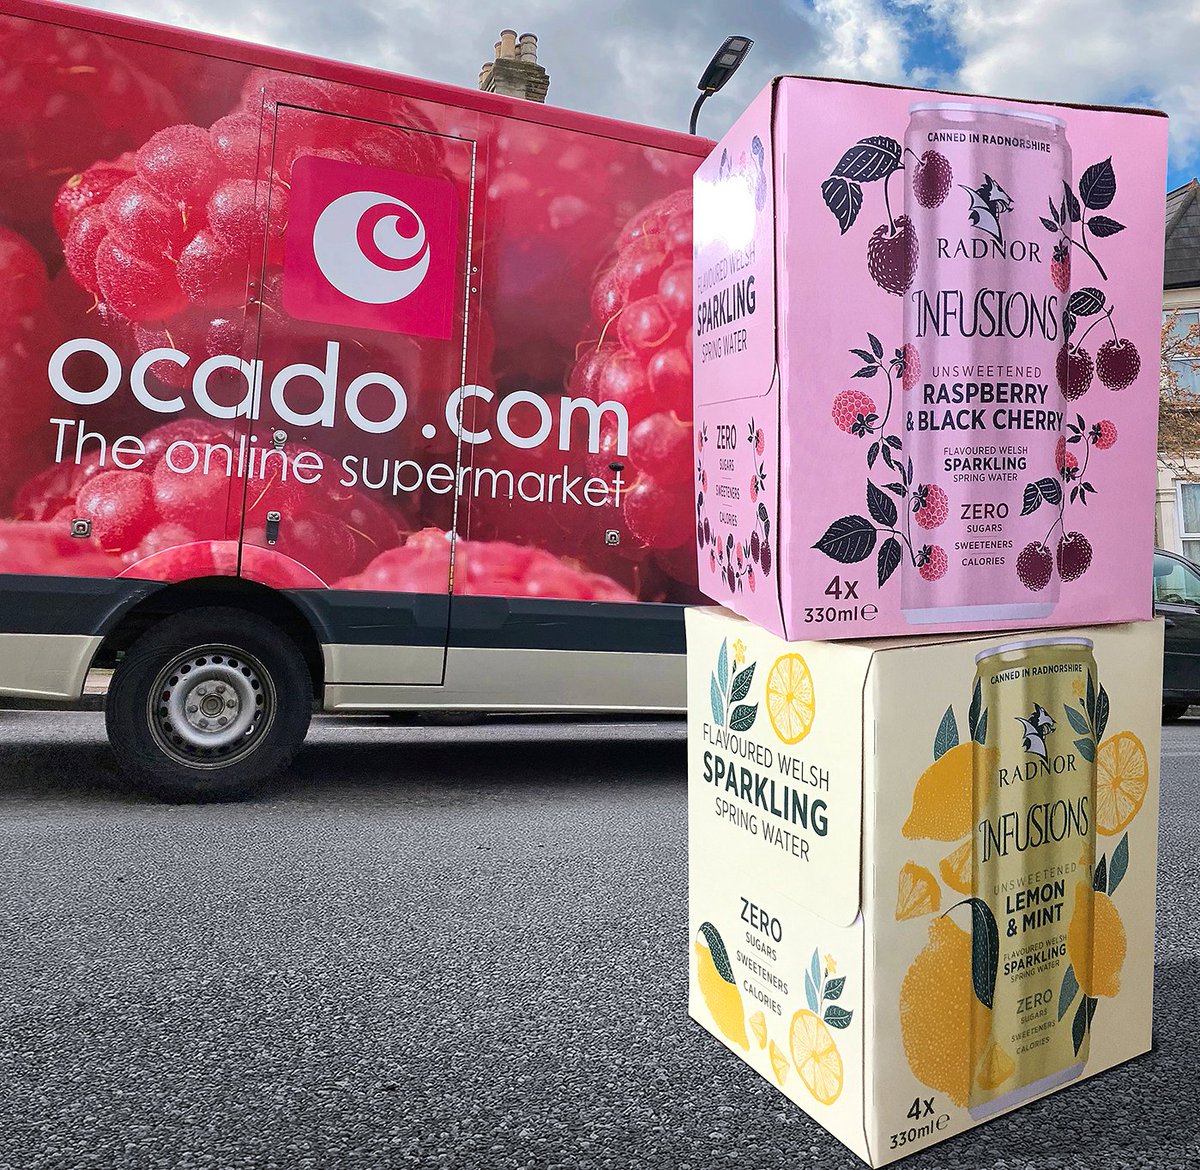 🍒🍋 ** NEW LISTING ALERT** 🍒🍋 We are very excited to say that our Radnor Infusion 4 packs are now available online at @ocadouk Another way to have Radnor Infusions delivered to your door! 🍒🍋🍒🍋🍒🍋🍒🍋🍒🍋🍒🍋🍒🍋 #newlisting #ocado #drink #new #nowavailable #buynow